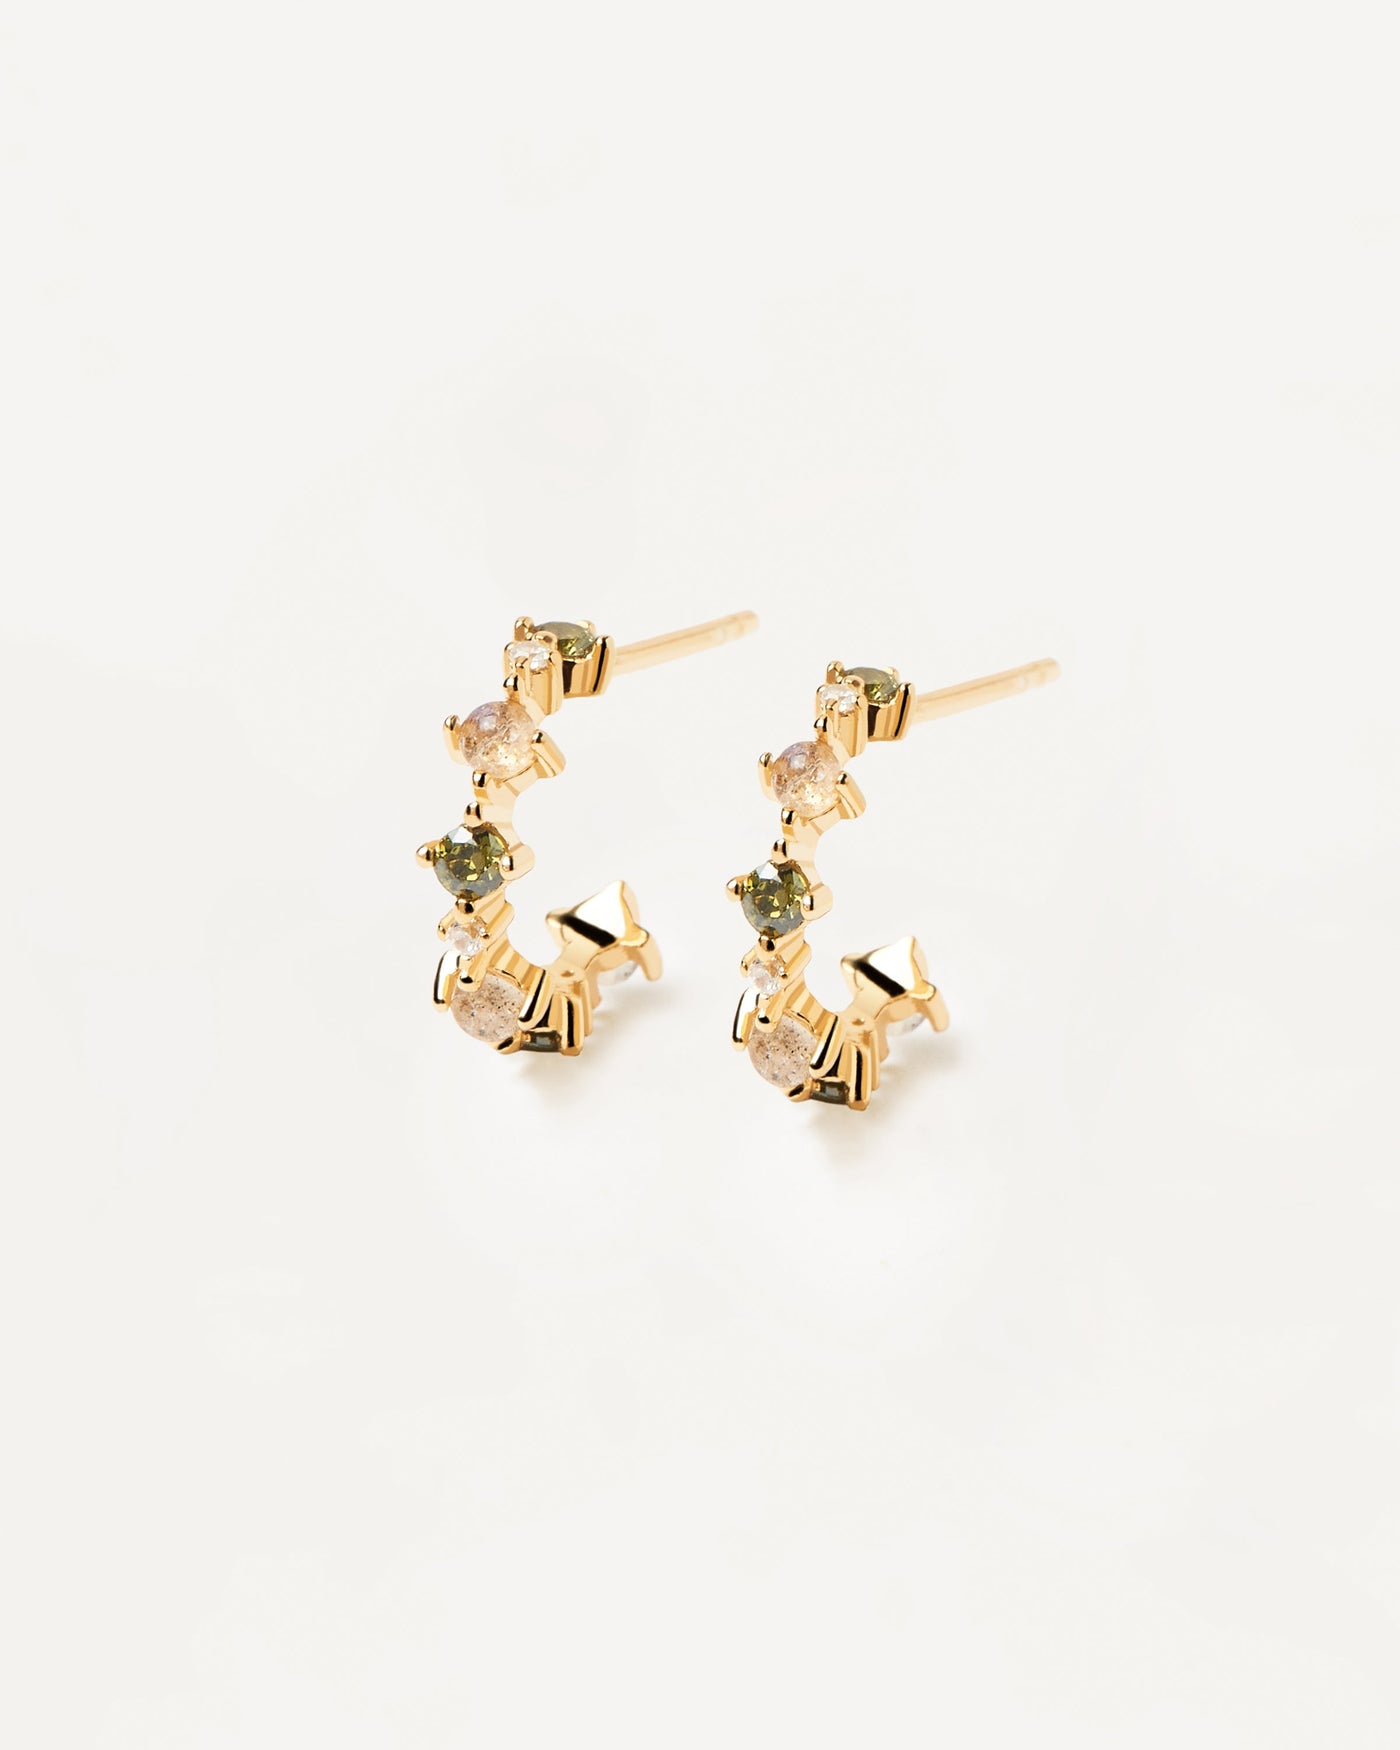 2023 Selection | Glory Earrings. Colourful labradorite, green peridot and white zirconia set on 18k gold plated 925 silver c-hoop earrings. Get the latest arrival from PDPAOLA. Place your order safely and get this Best Seller. Free Shipping.